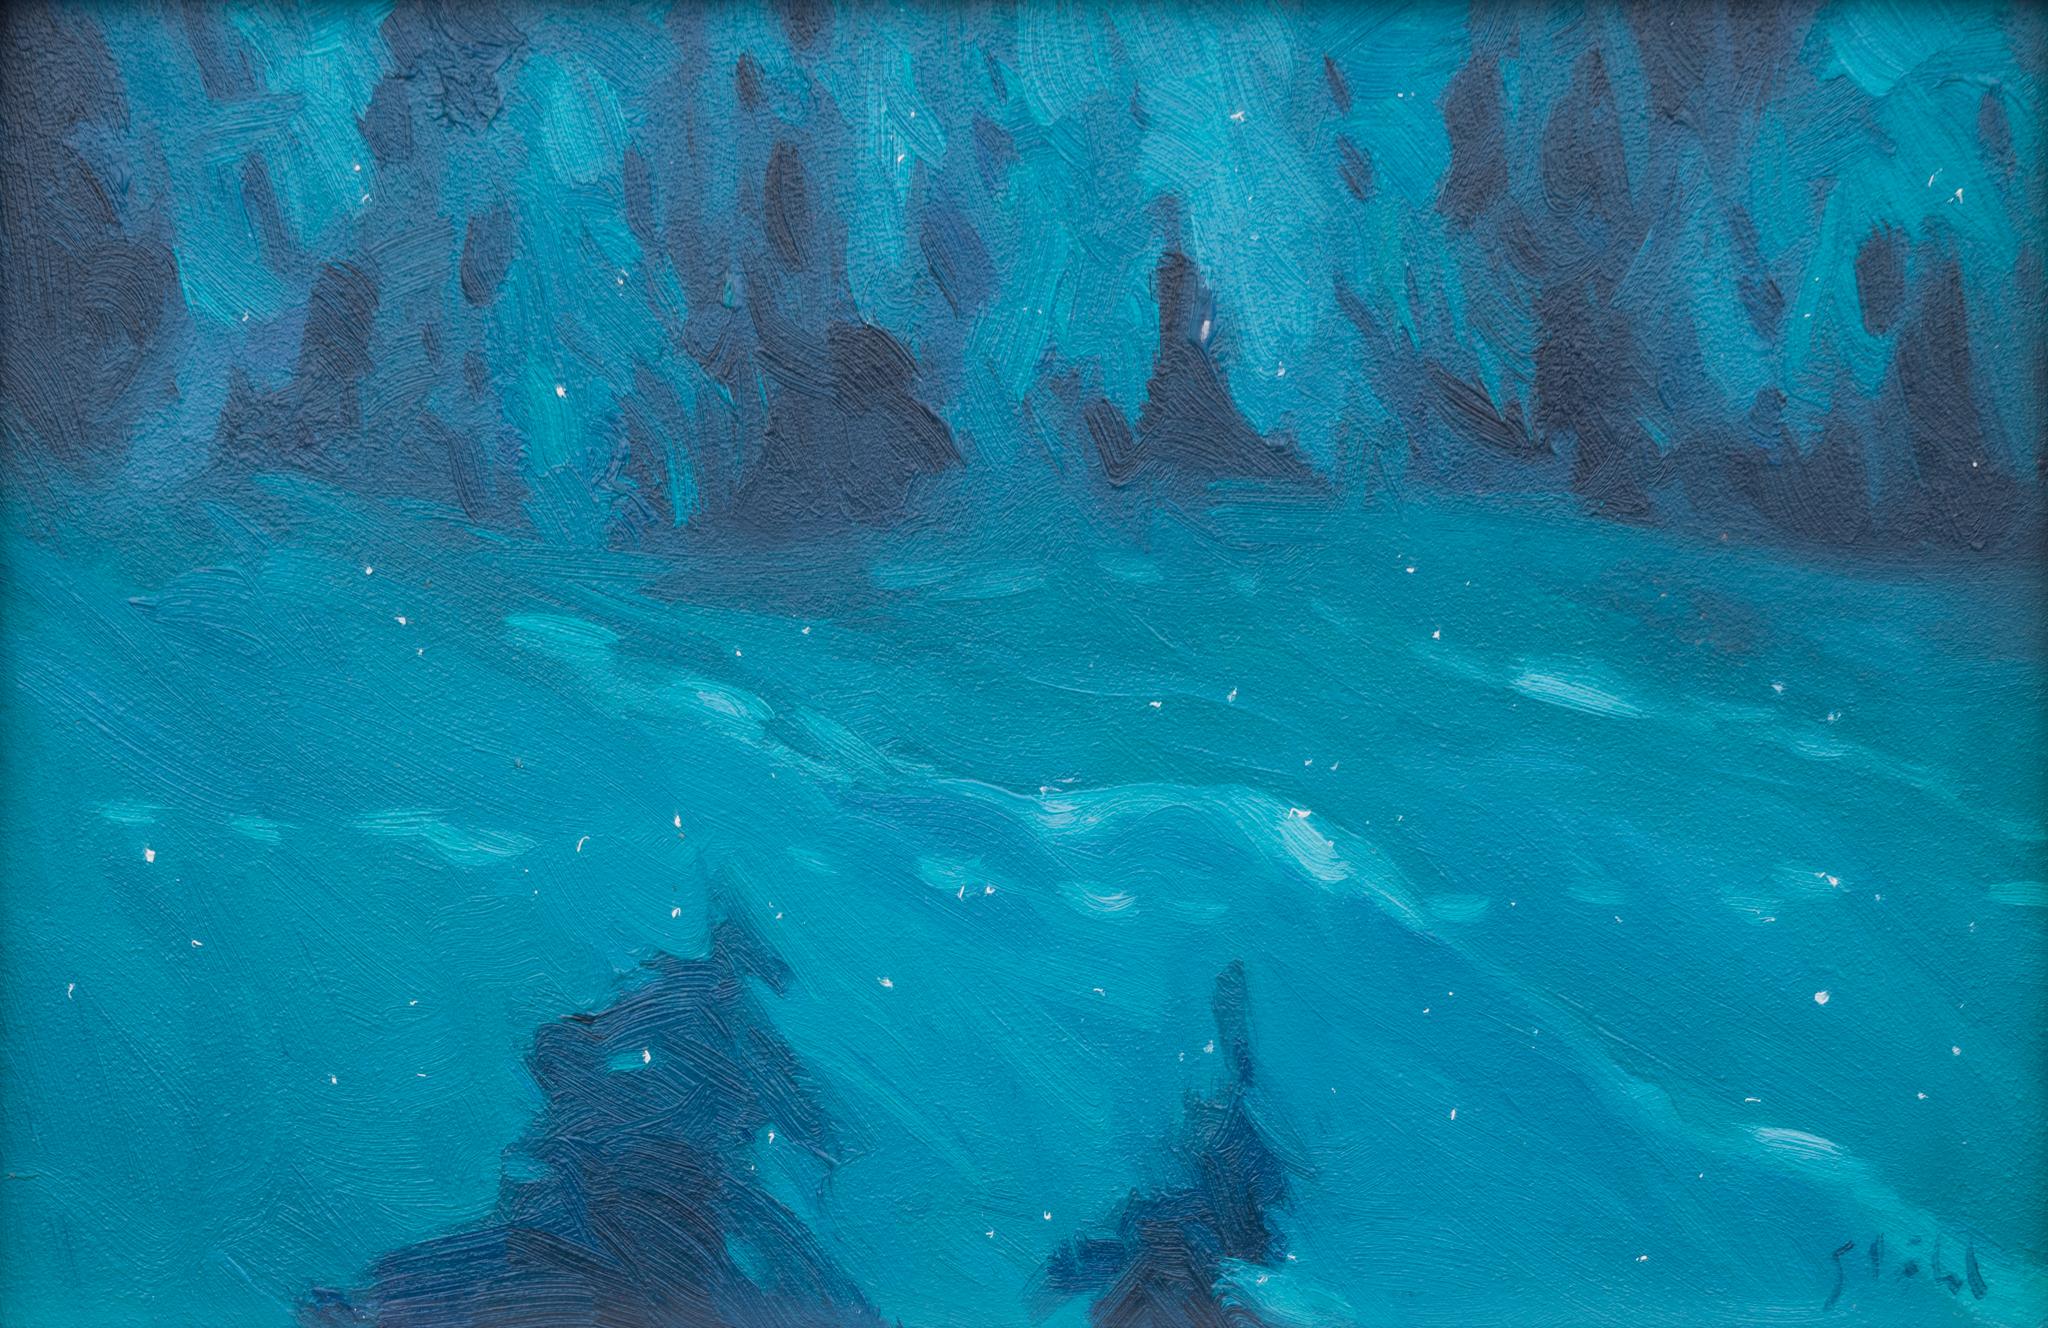 Moonlight Impression Painting by Swedish Plein Air Artist Anders Ståhl For Sale 1